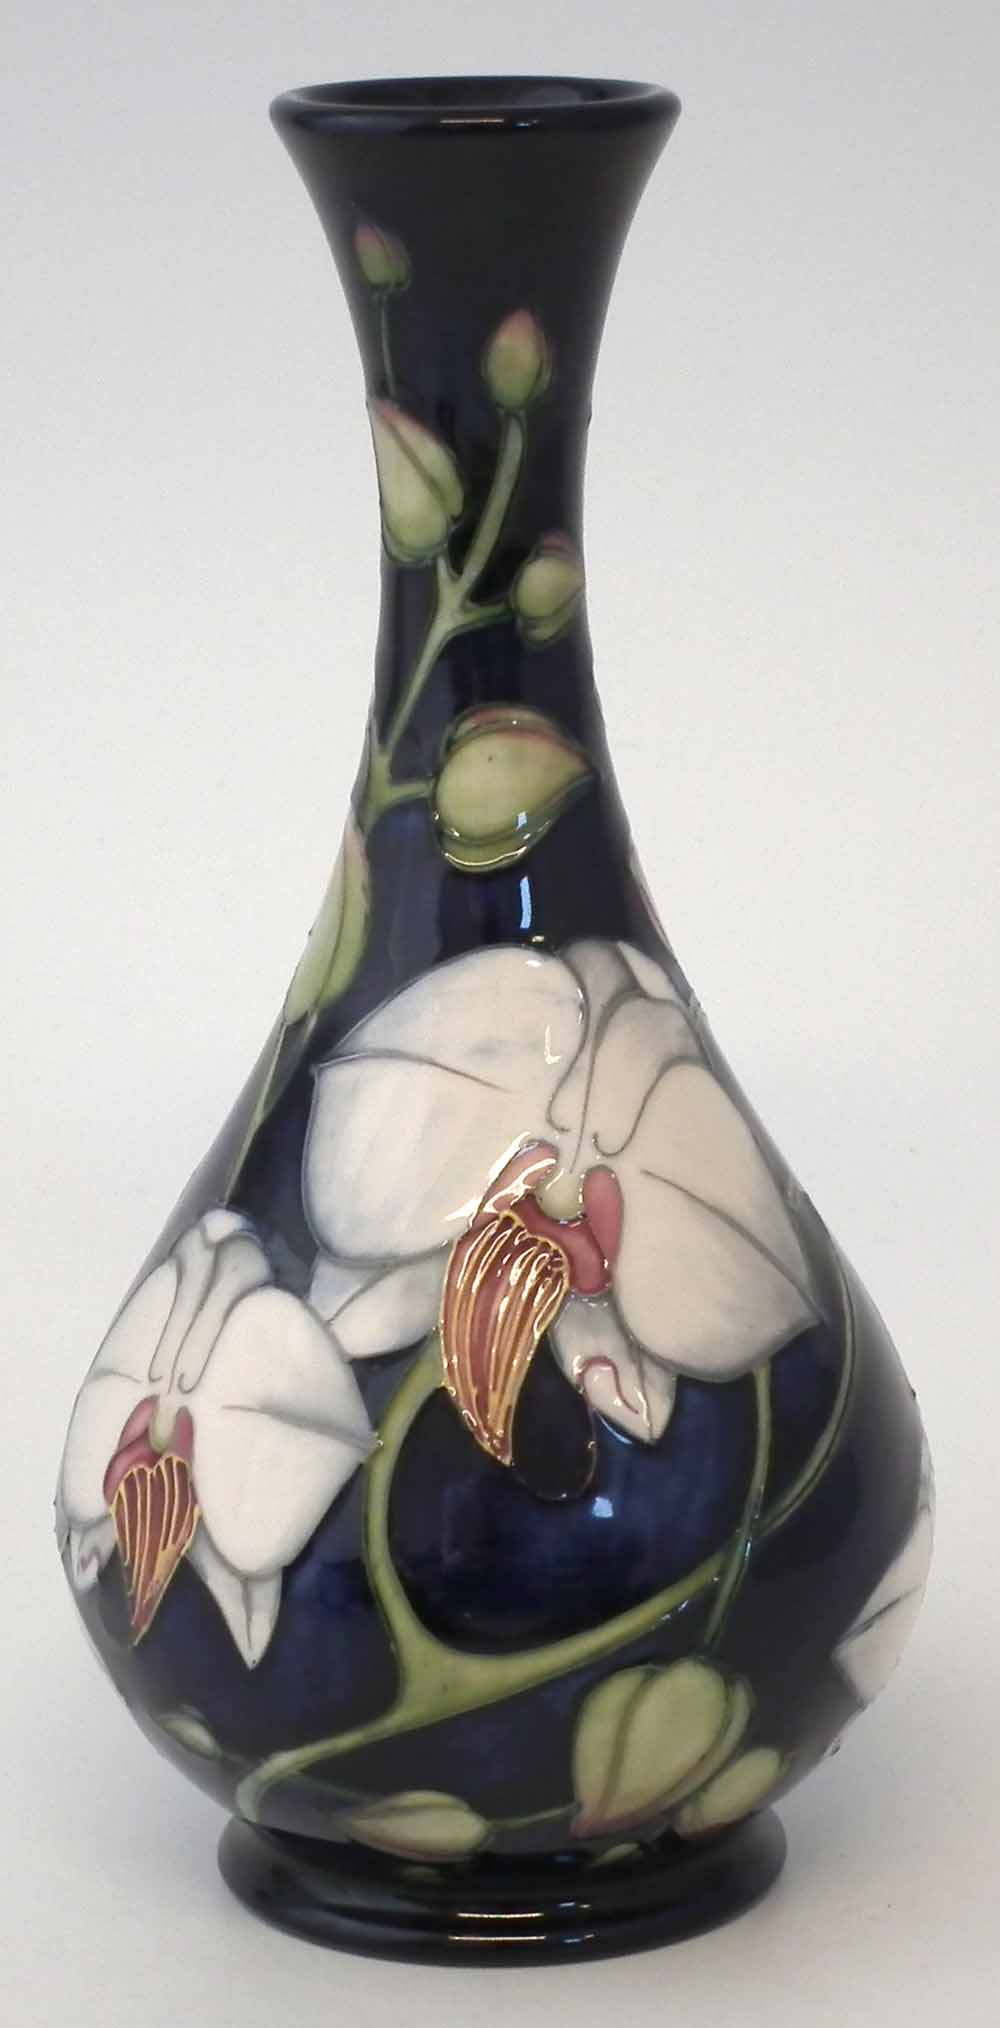 Moorcroft trial vase, decorated with Chatsworth pattern after Philip Gibson, dated 18.8.2001, 23cm